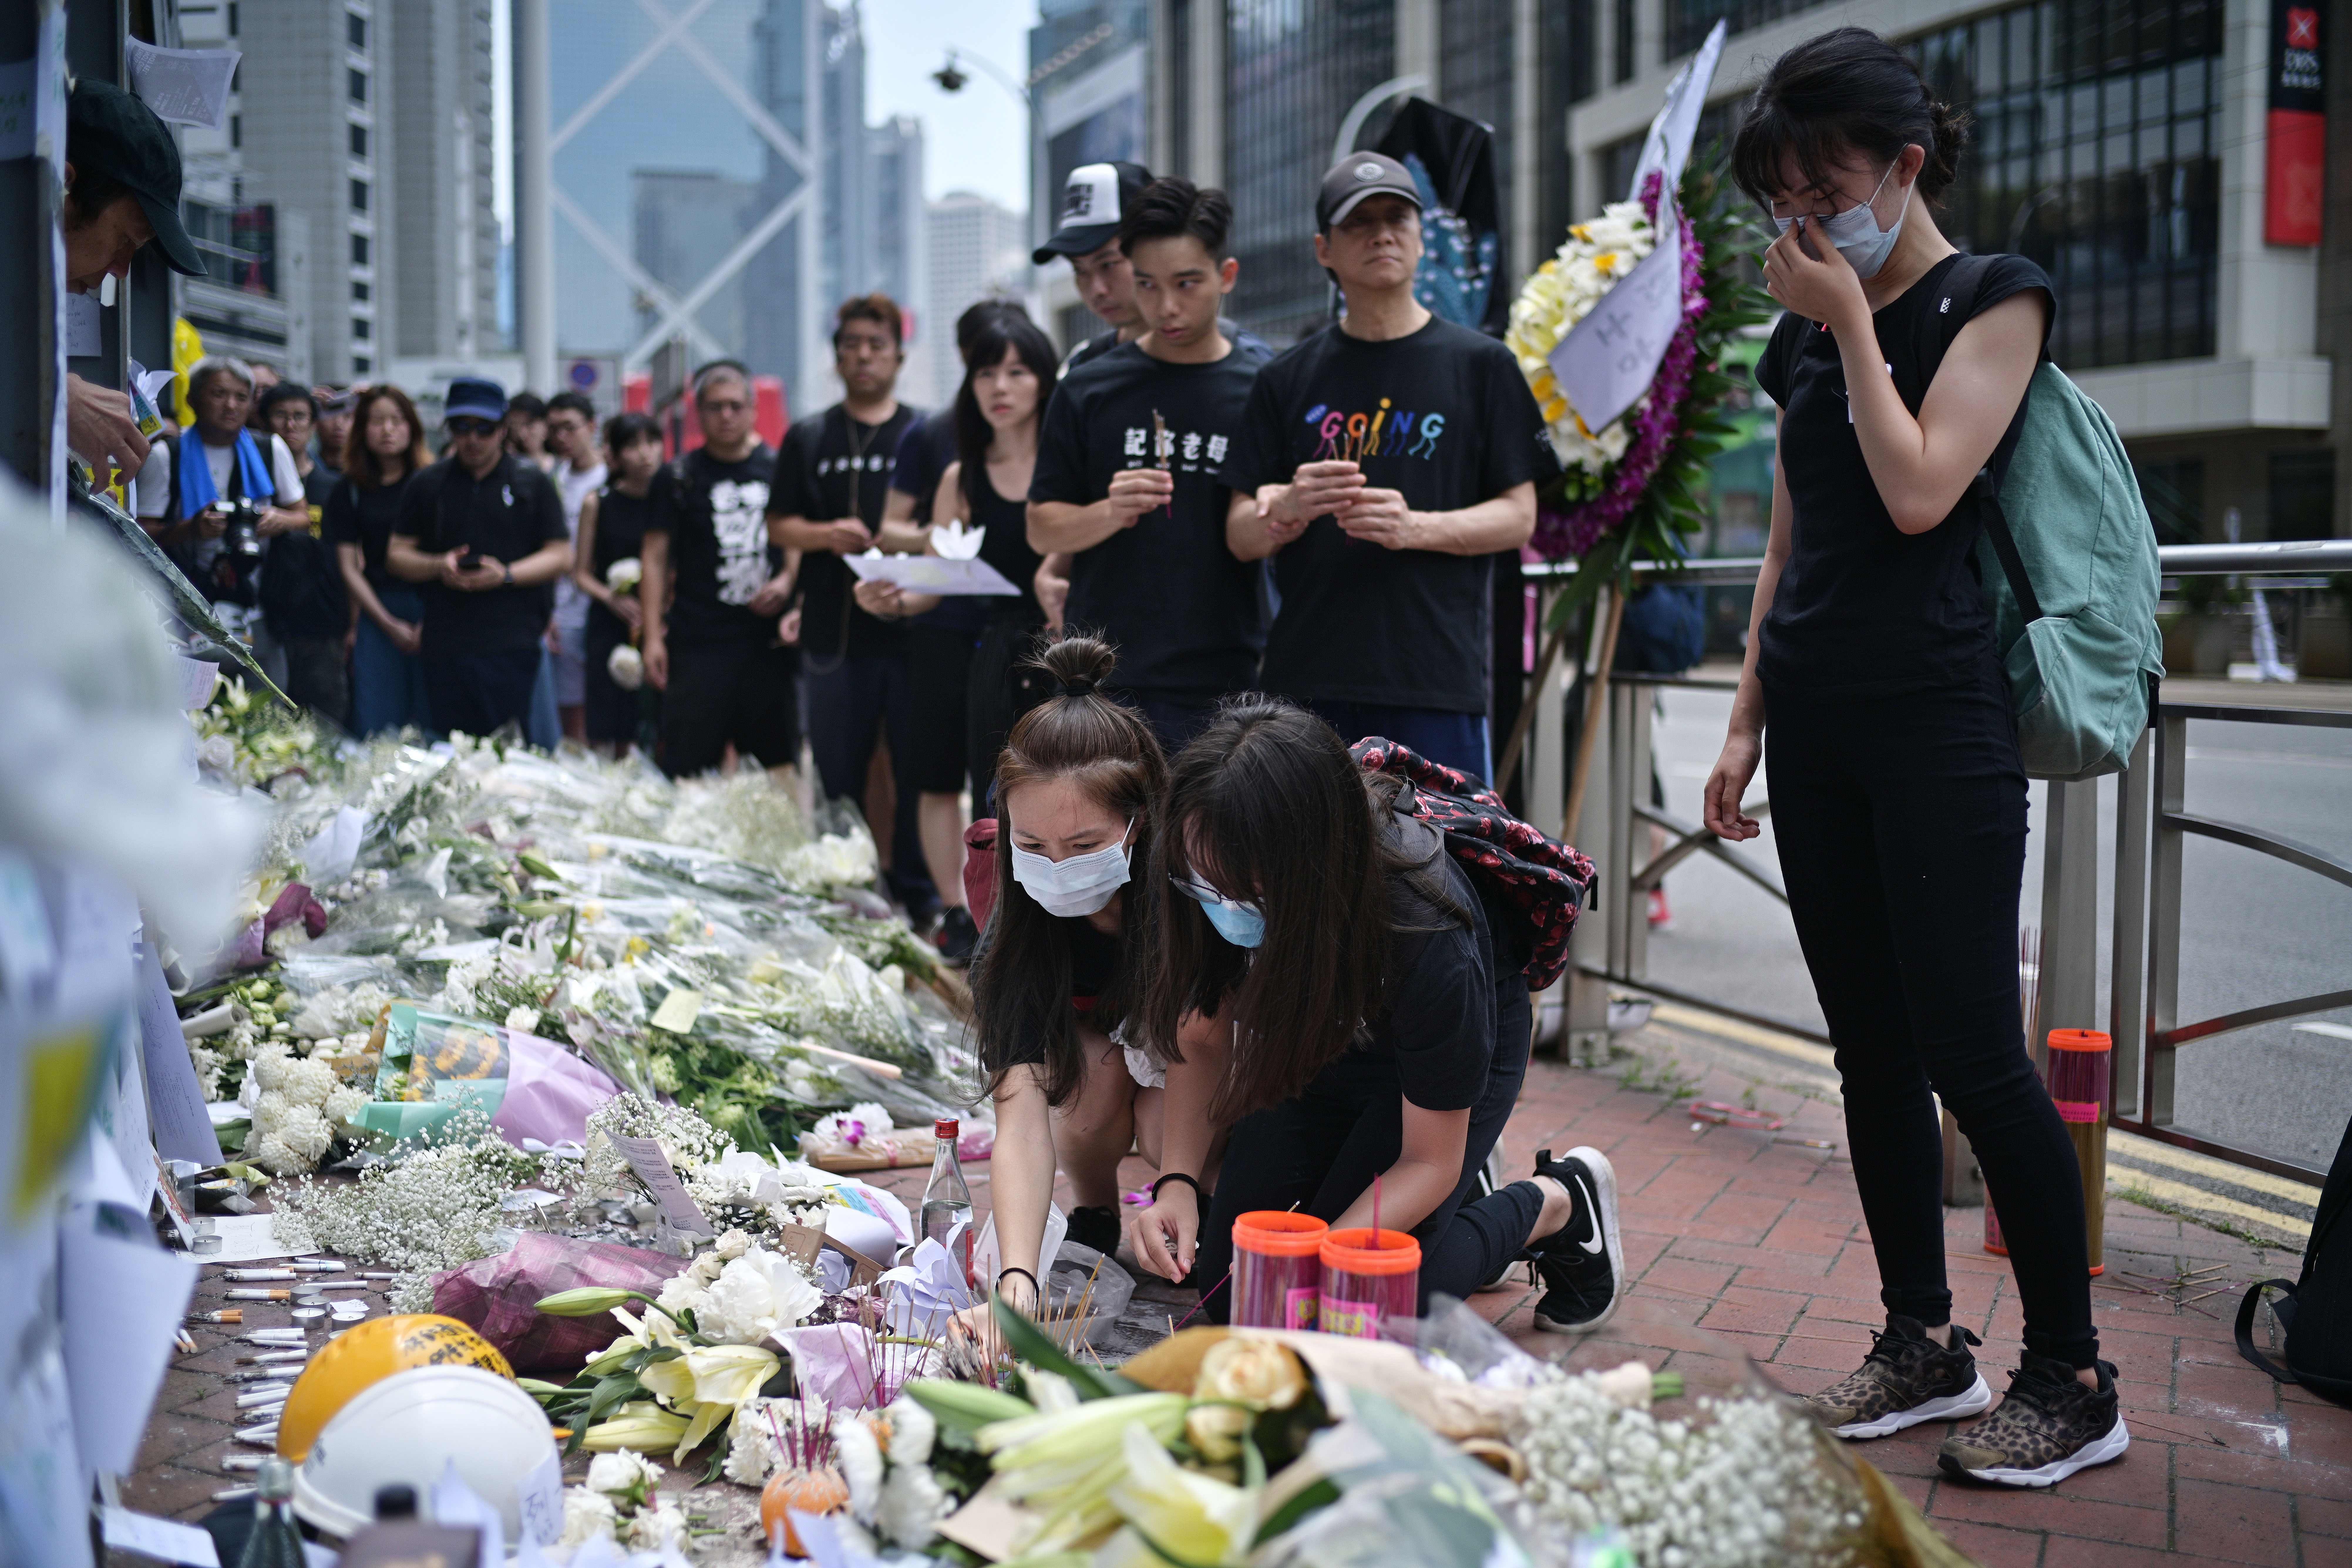 Mourners place flowers and offer prayers at the site where a protester died, prior to the start of a rally in Hong Kong on June 16, 2019. 